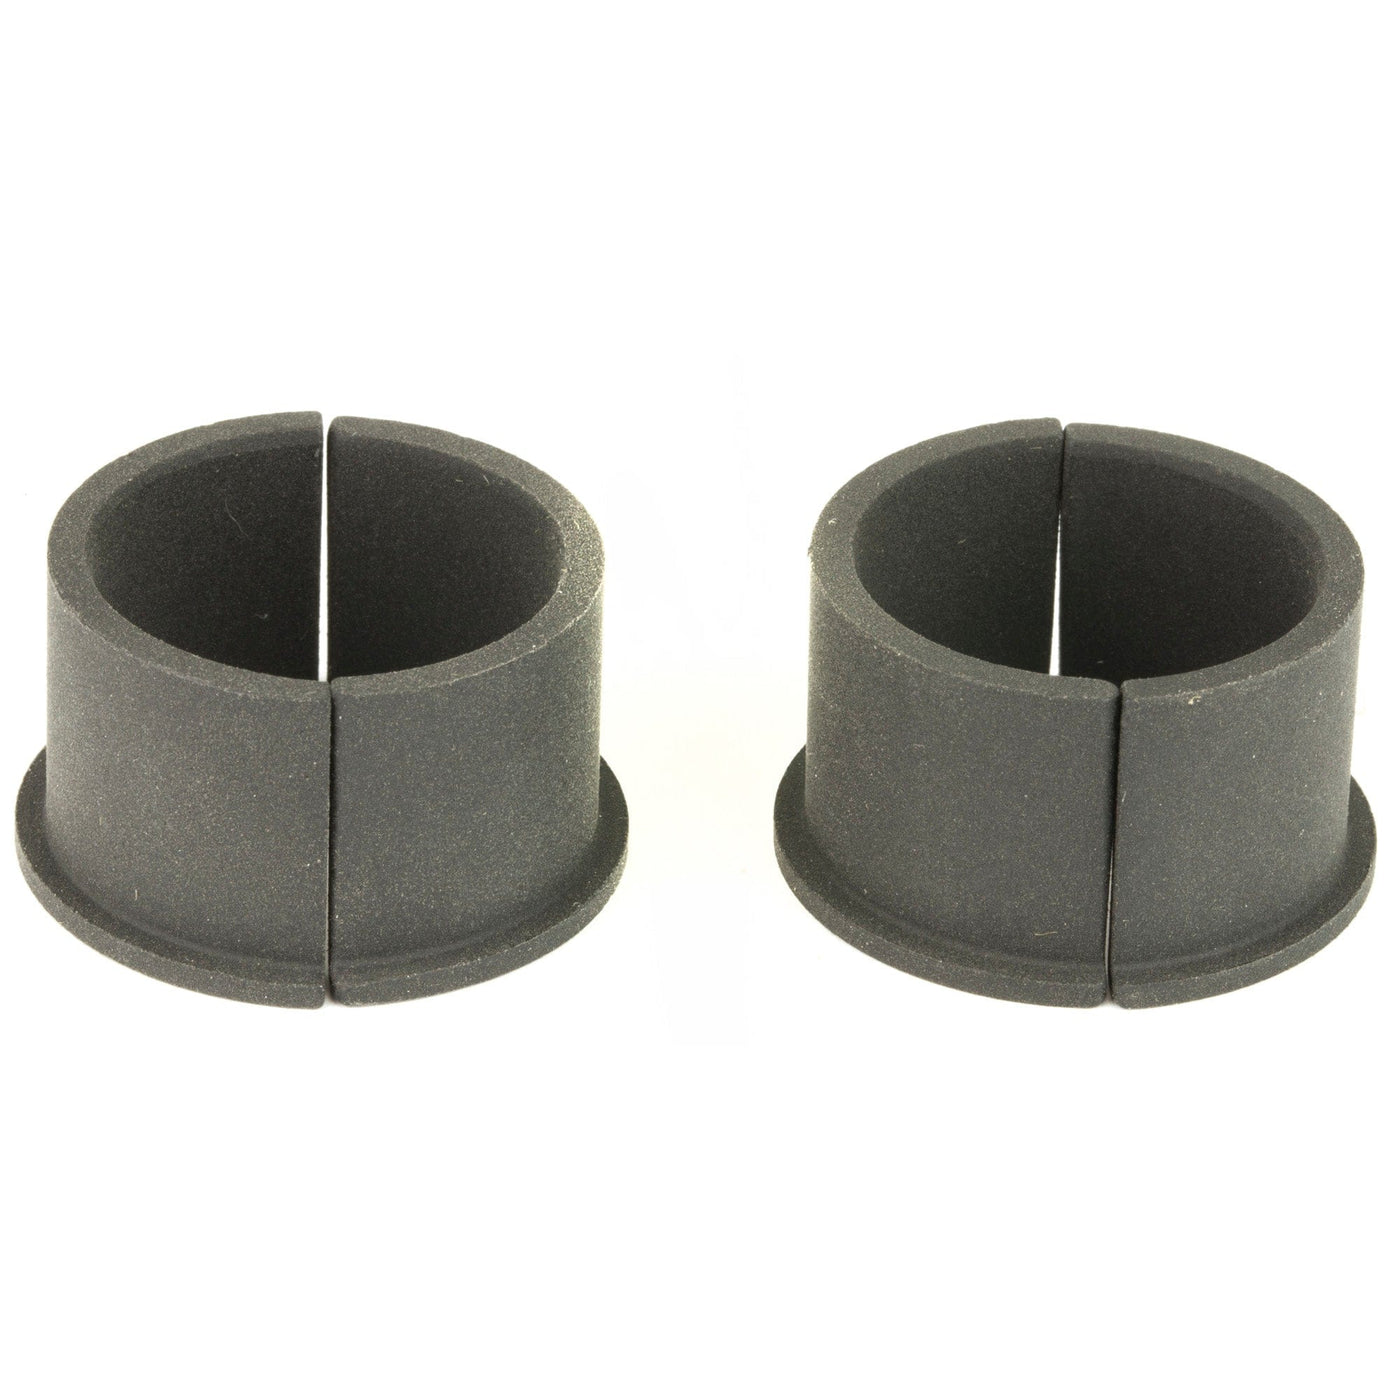 GG&G, Inc. Gg&g 30mm To 1" Ring Reducer Scope Mounts